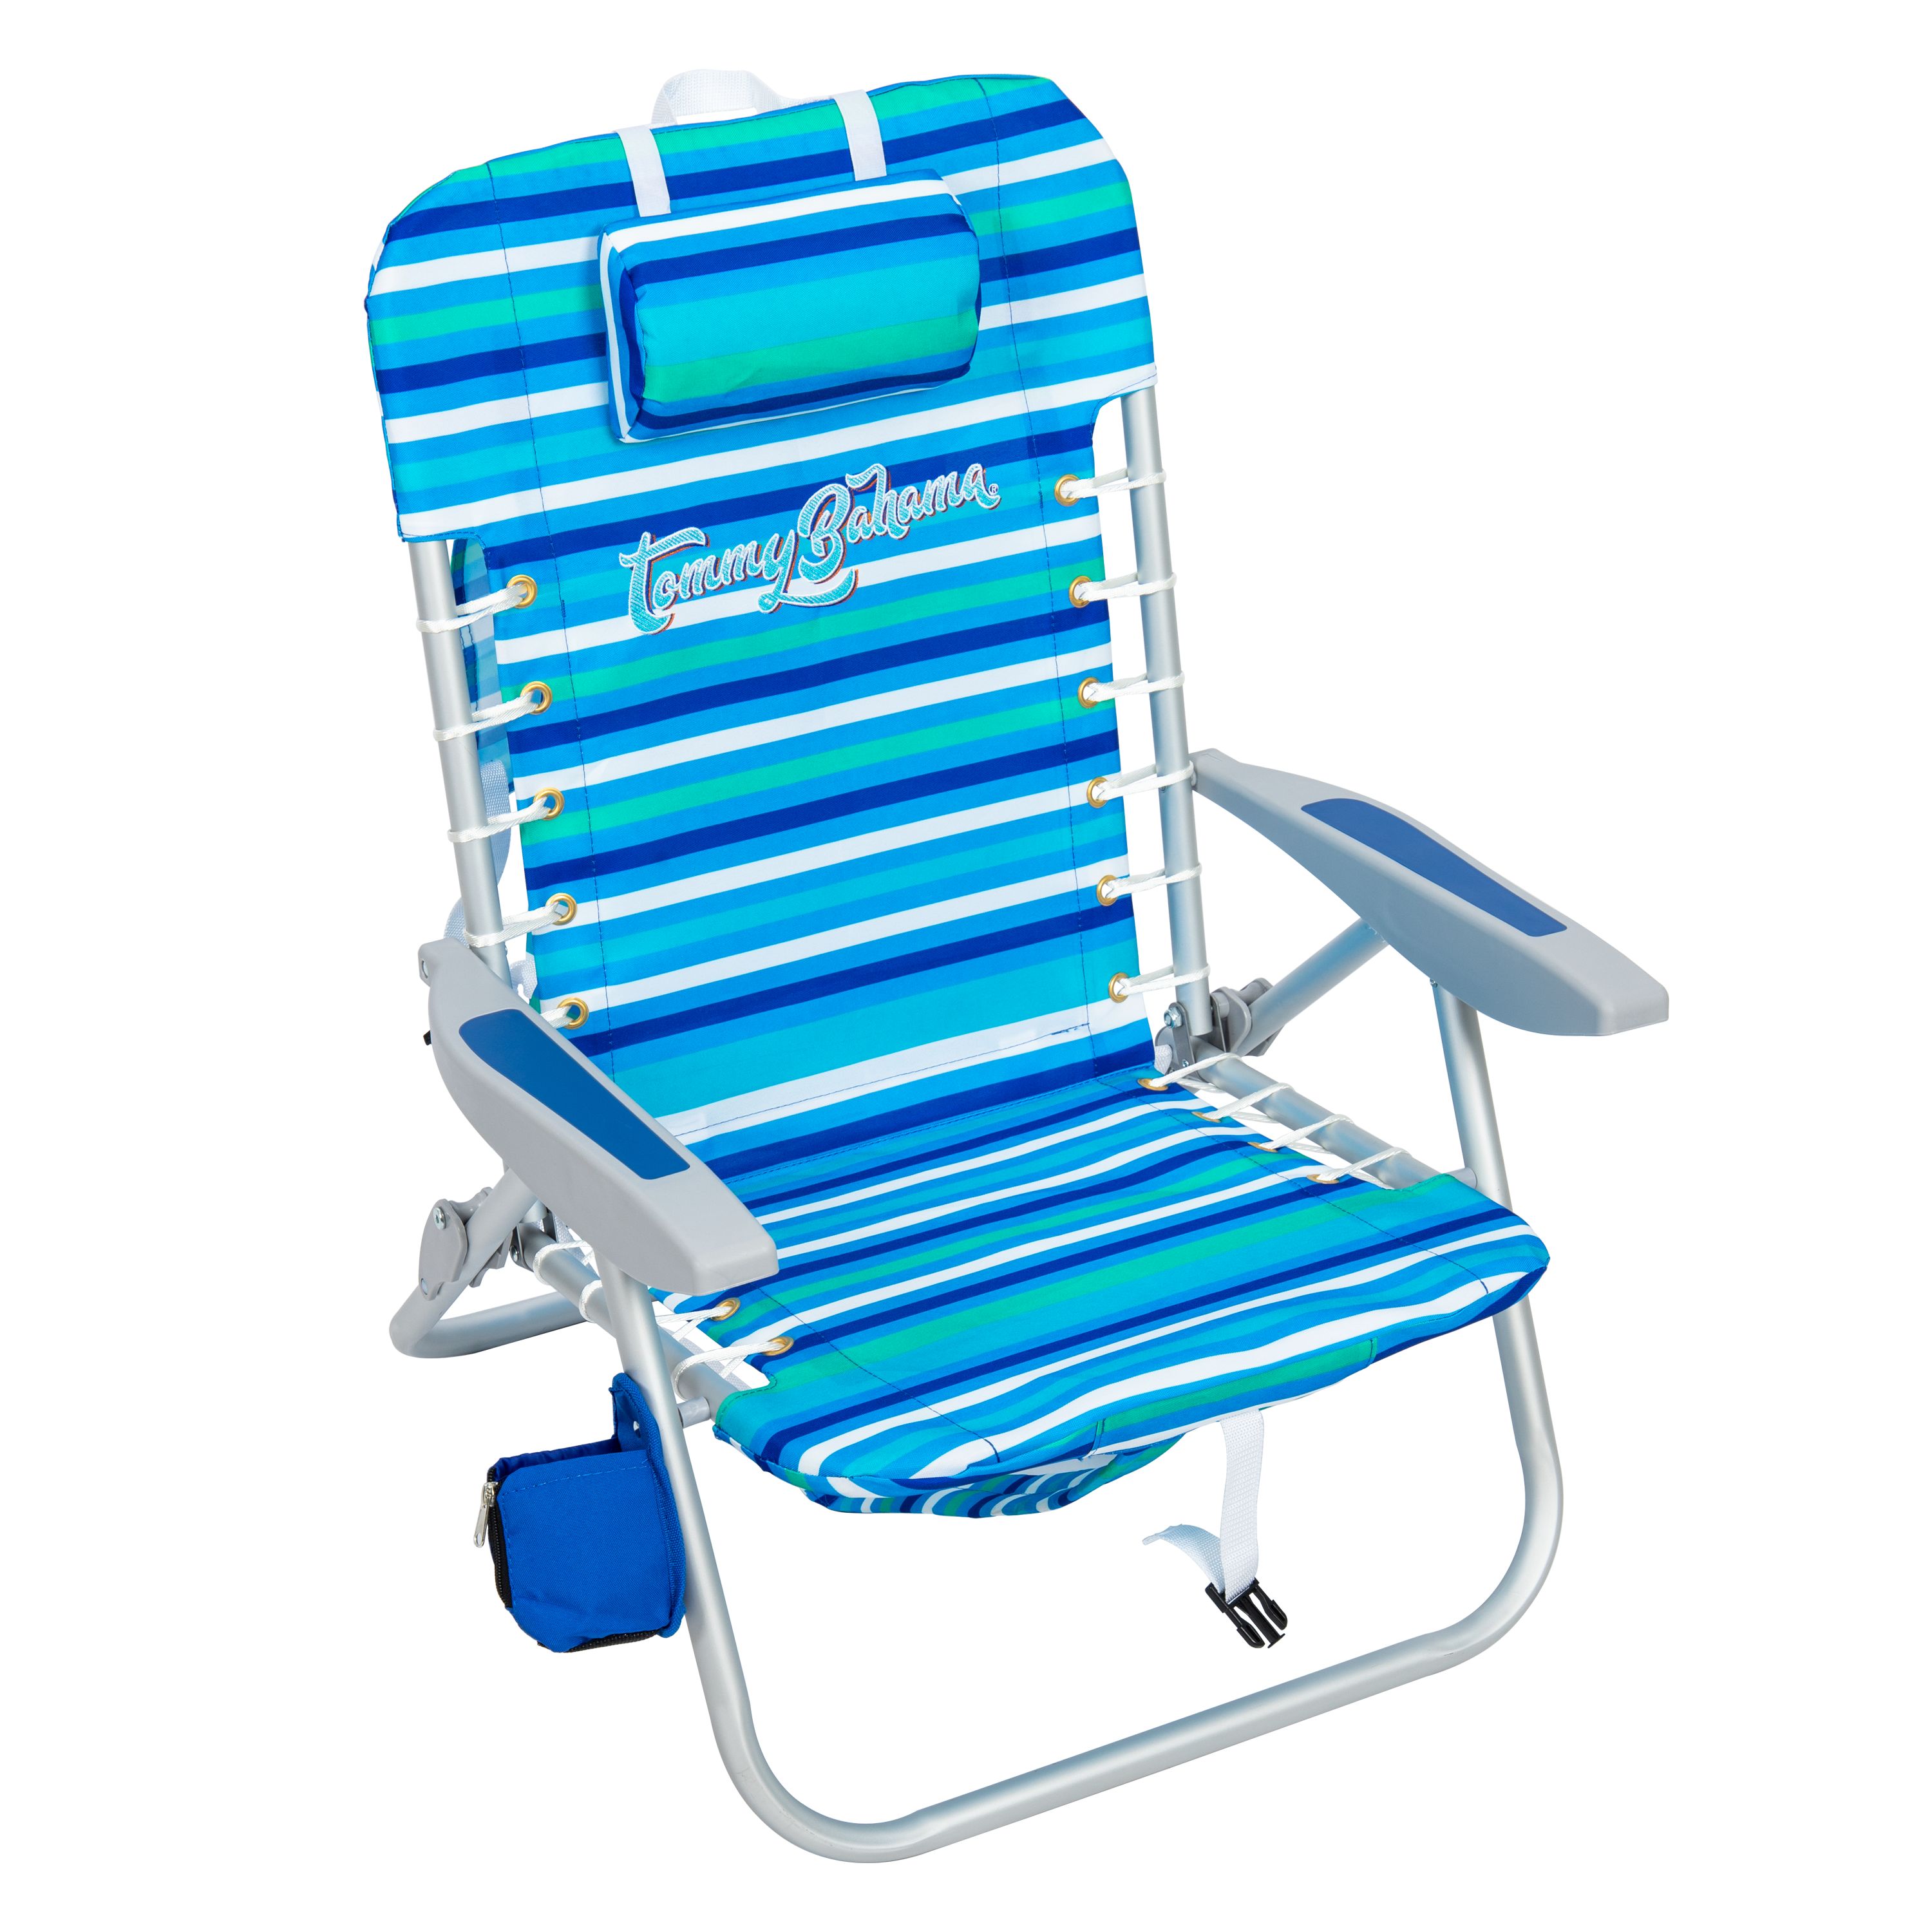 tommy bahama chair